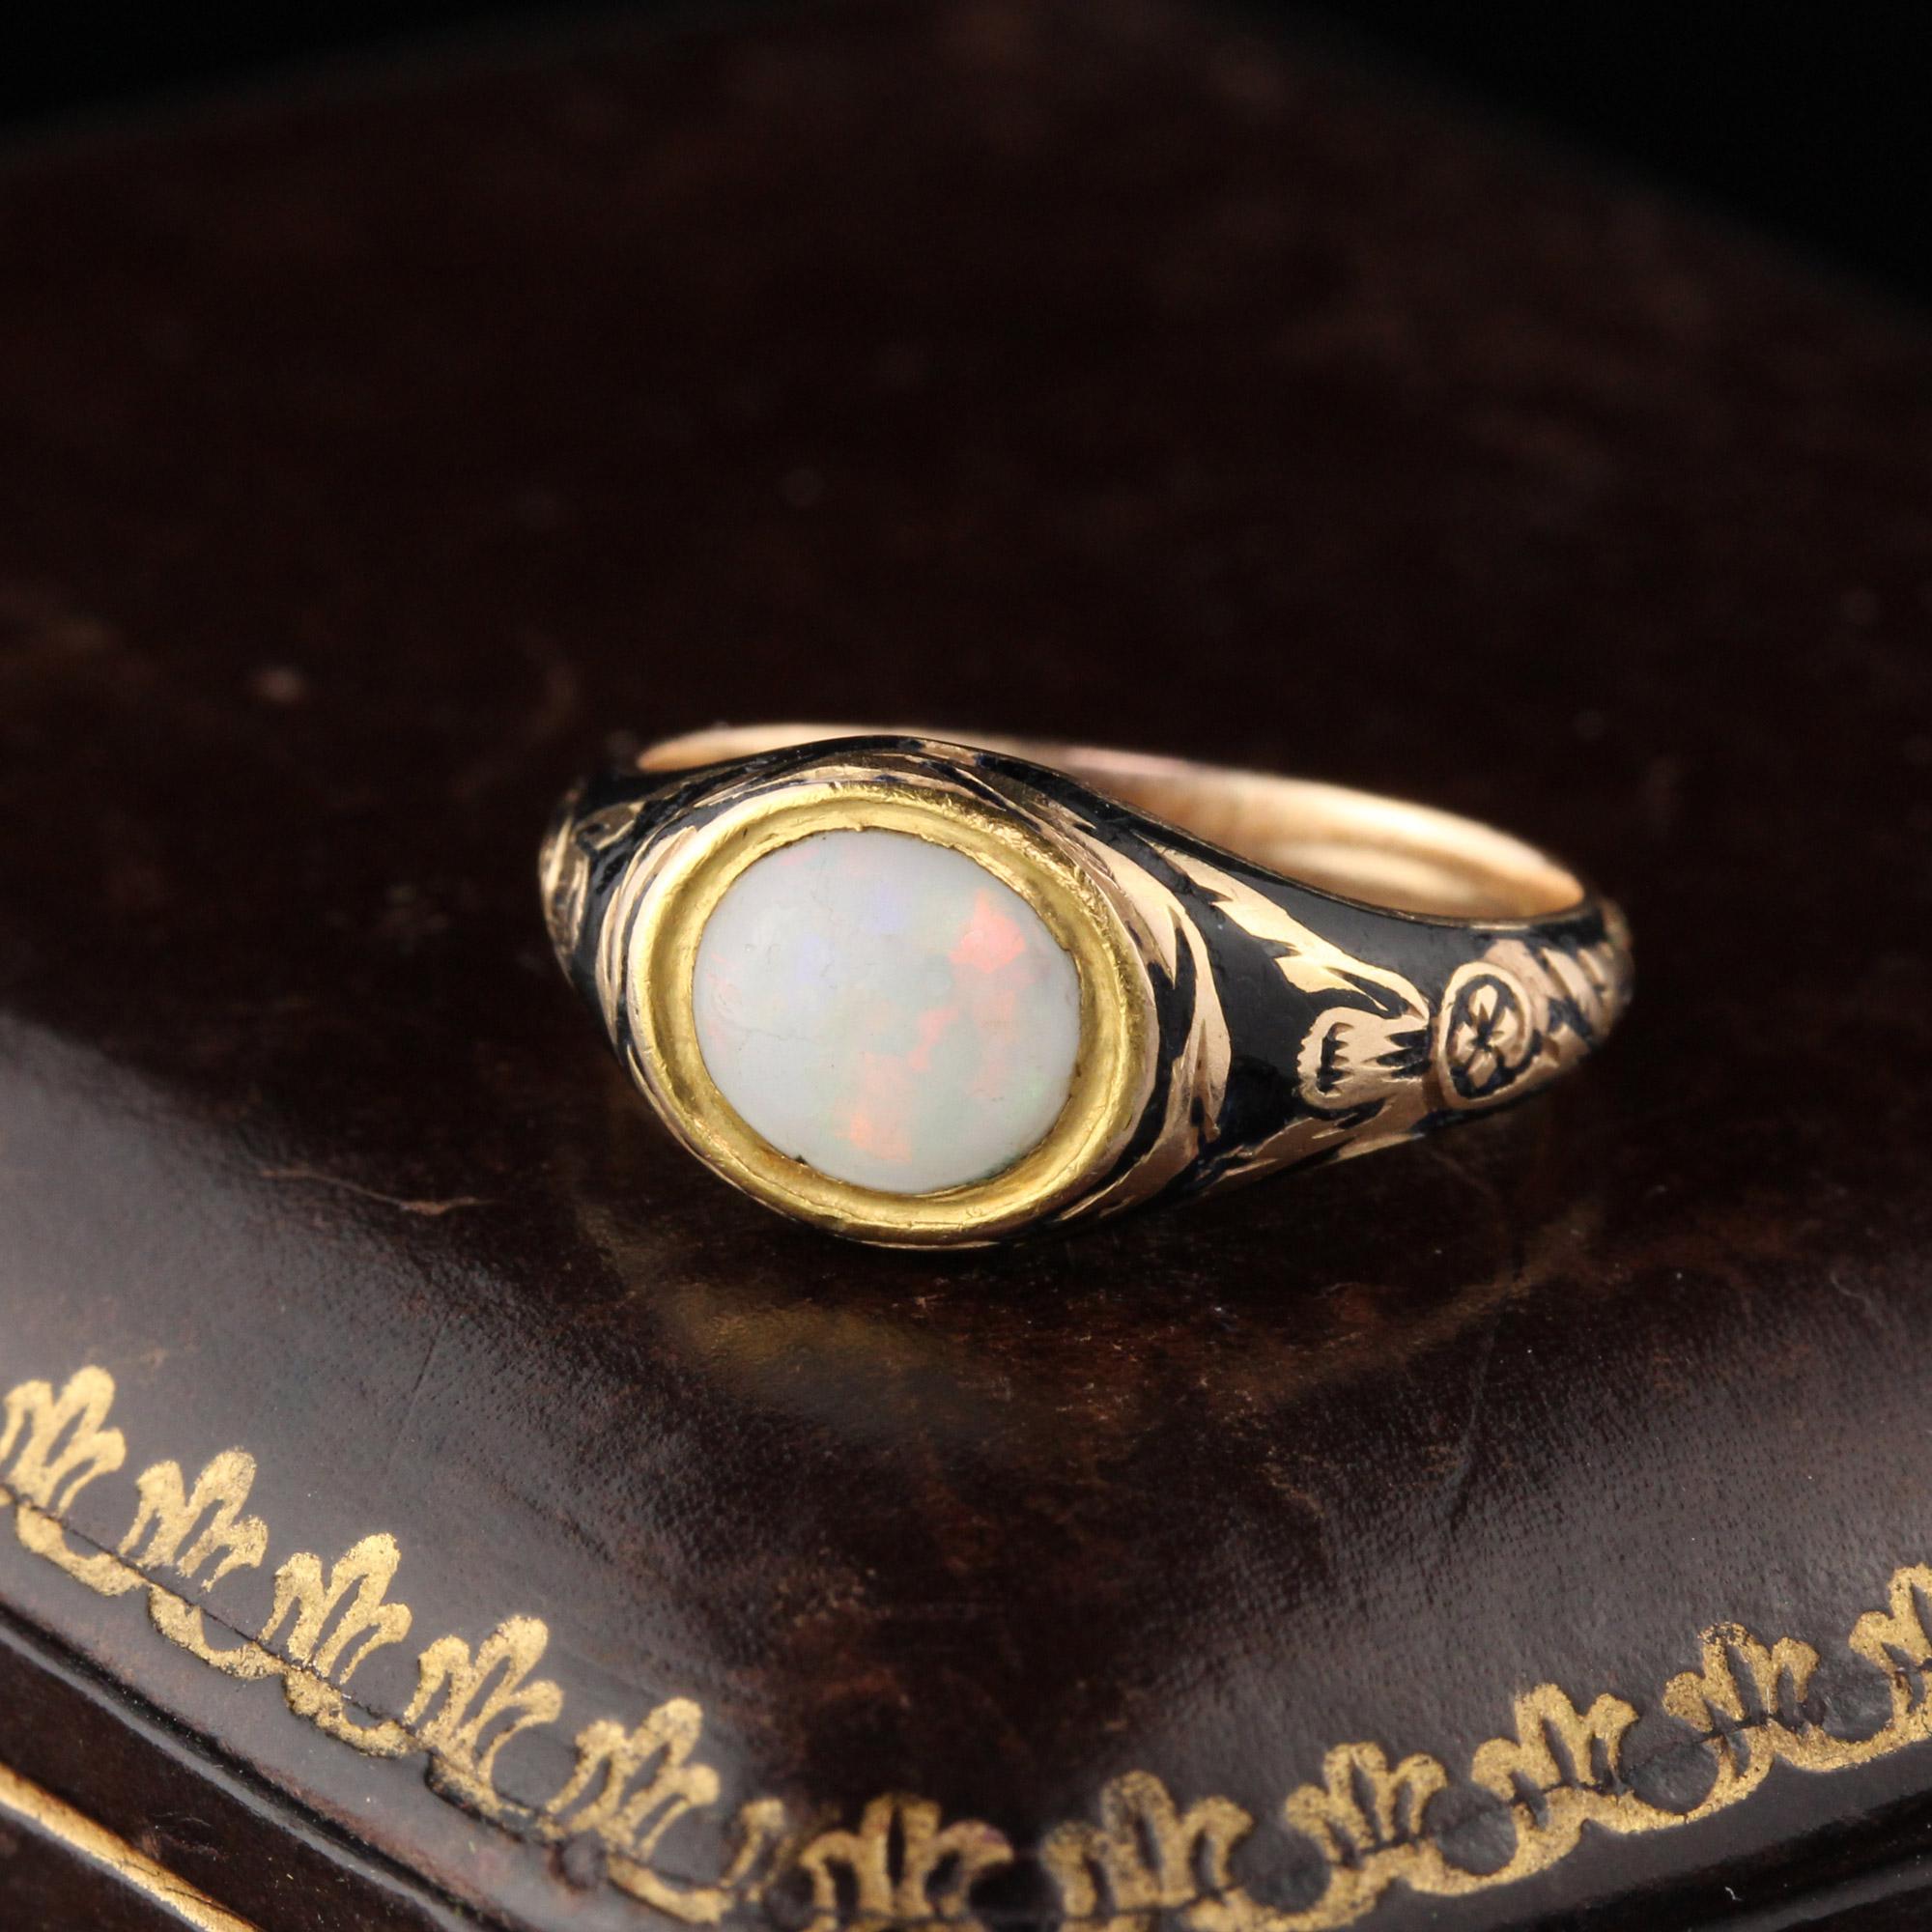 Beautiful Georgian Signet ring with a horizonally set oval opal in the center of the yellow gold & black enamel mounting. In very good condition for its age with some enamel loss. See images. Makes an awesome pinky ring!

#R0394

Metal: 18KYellow